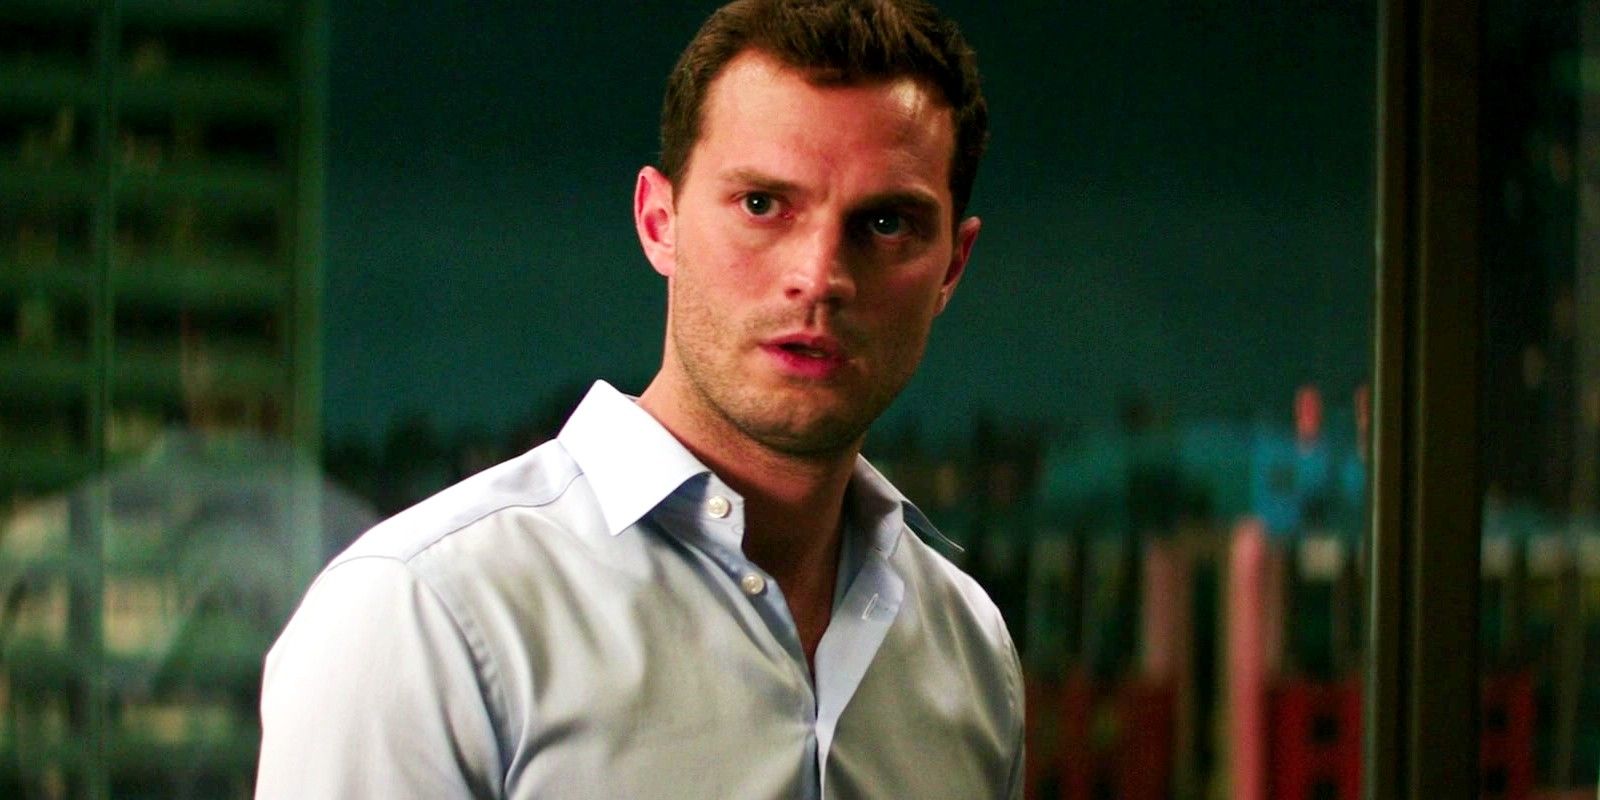 Fifty Shades of Grey Sequel Casts Christian Grey's Nemesis